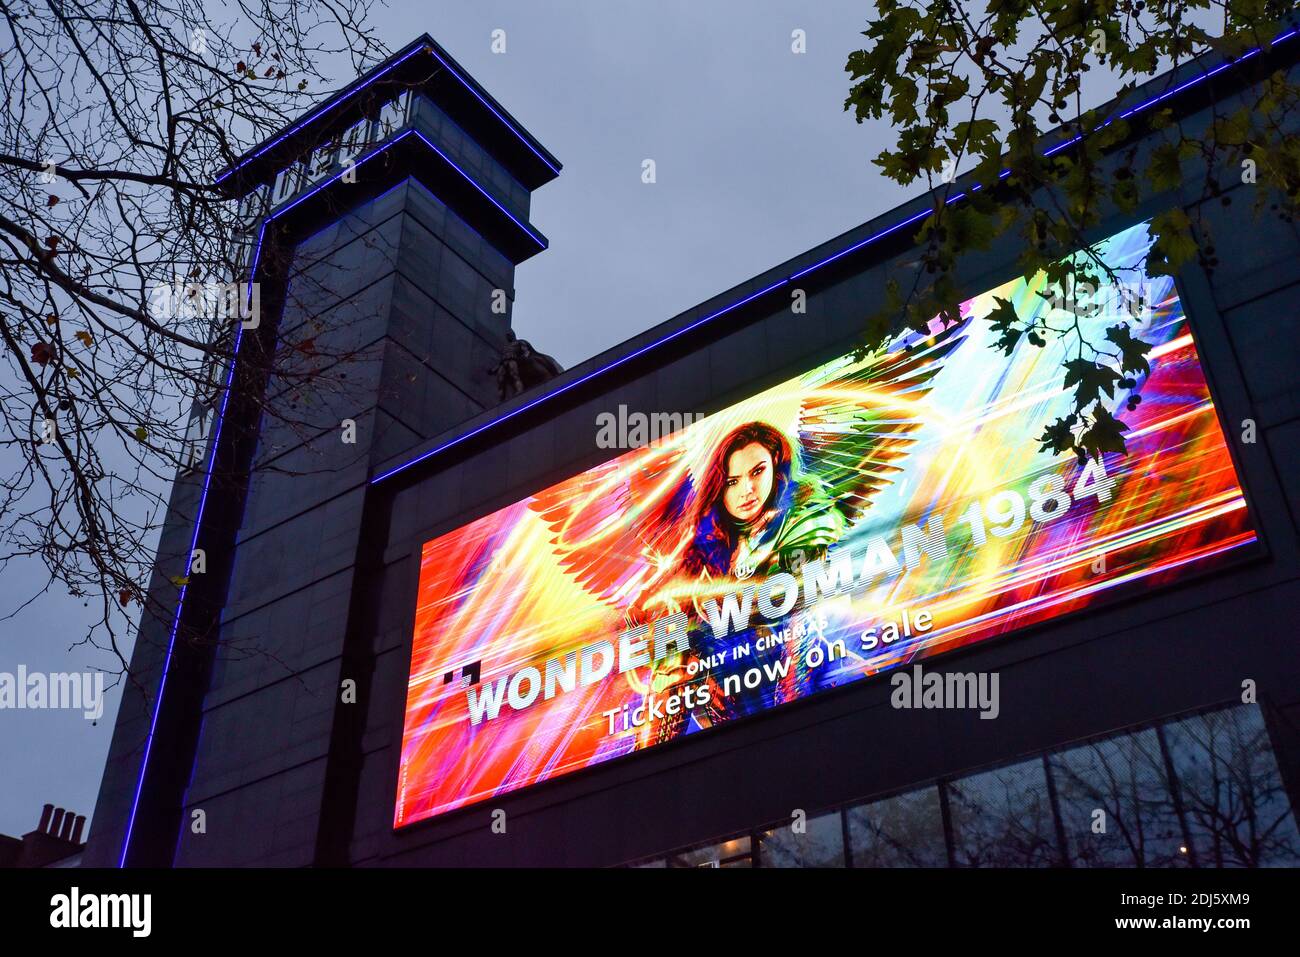 Odeon Luxe, Leicester Square, London, UK. 13th Dec 2020. Wonder Woman 1984  in cinemas in the U.K. from December16th for just one month then released  as VOD on SKY. Credit: Matthew Chattle/Alamy